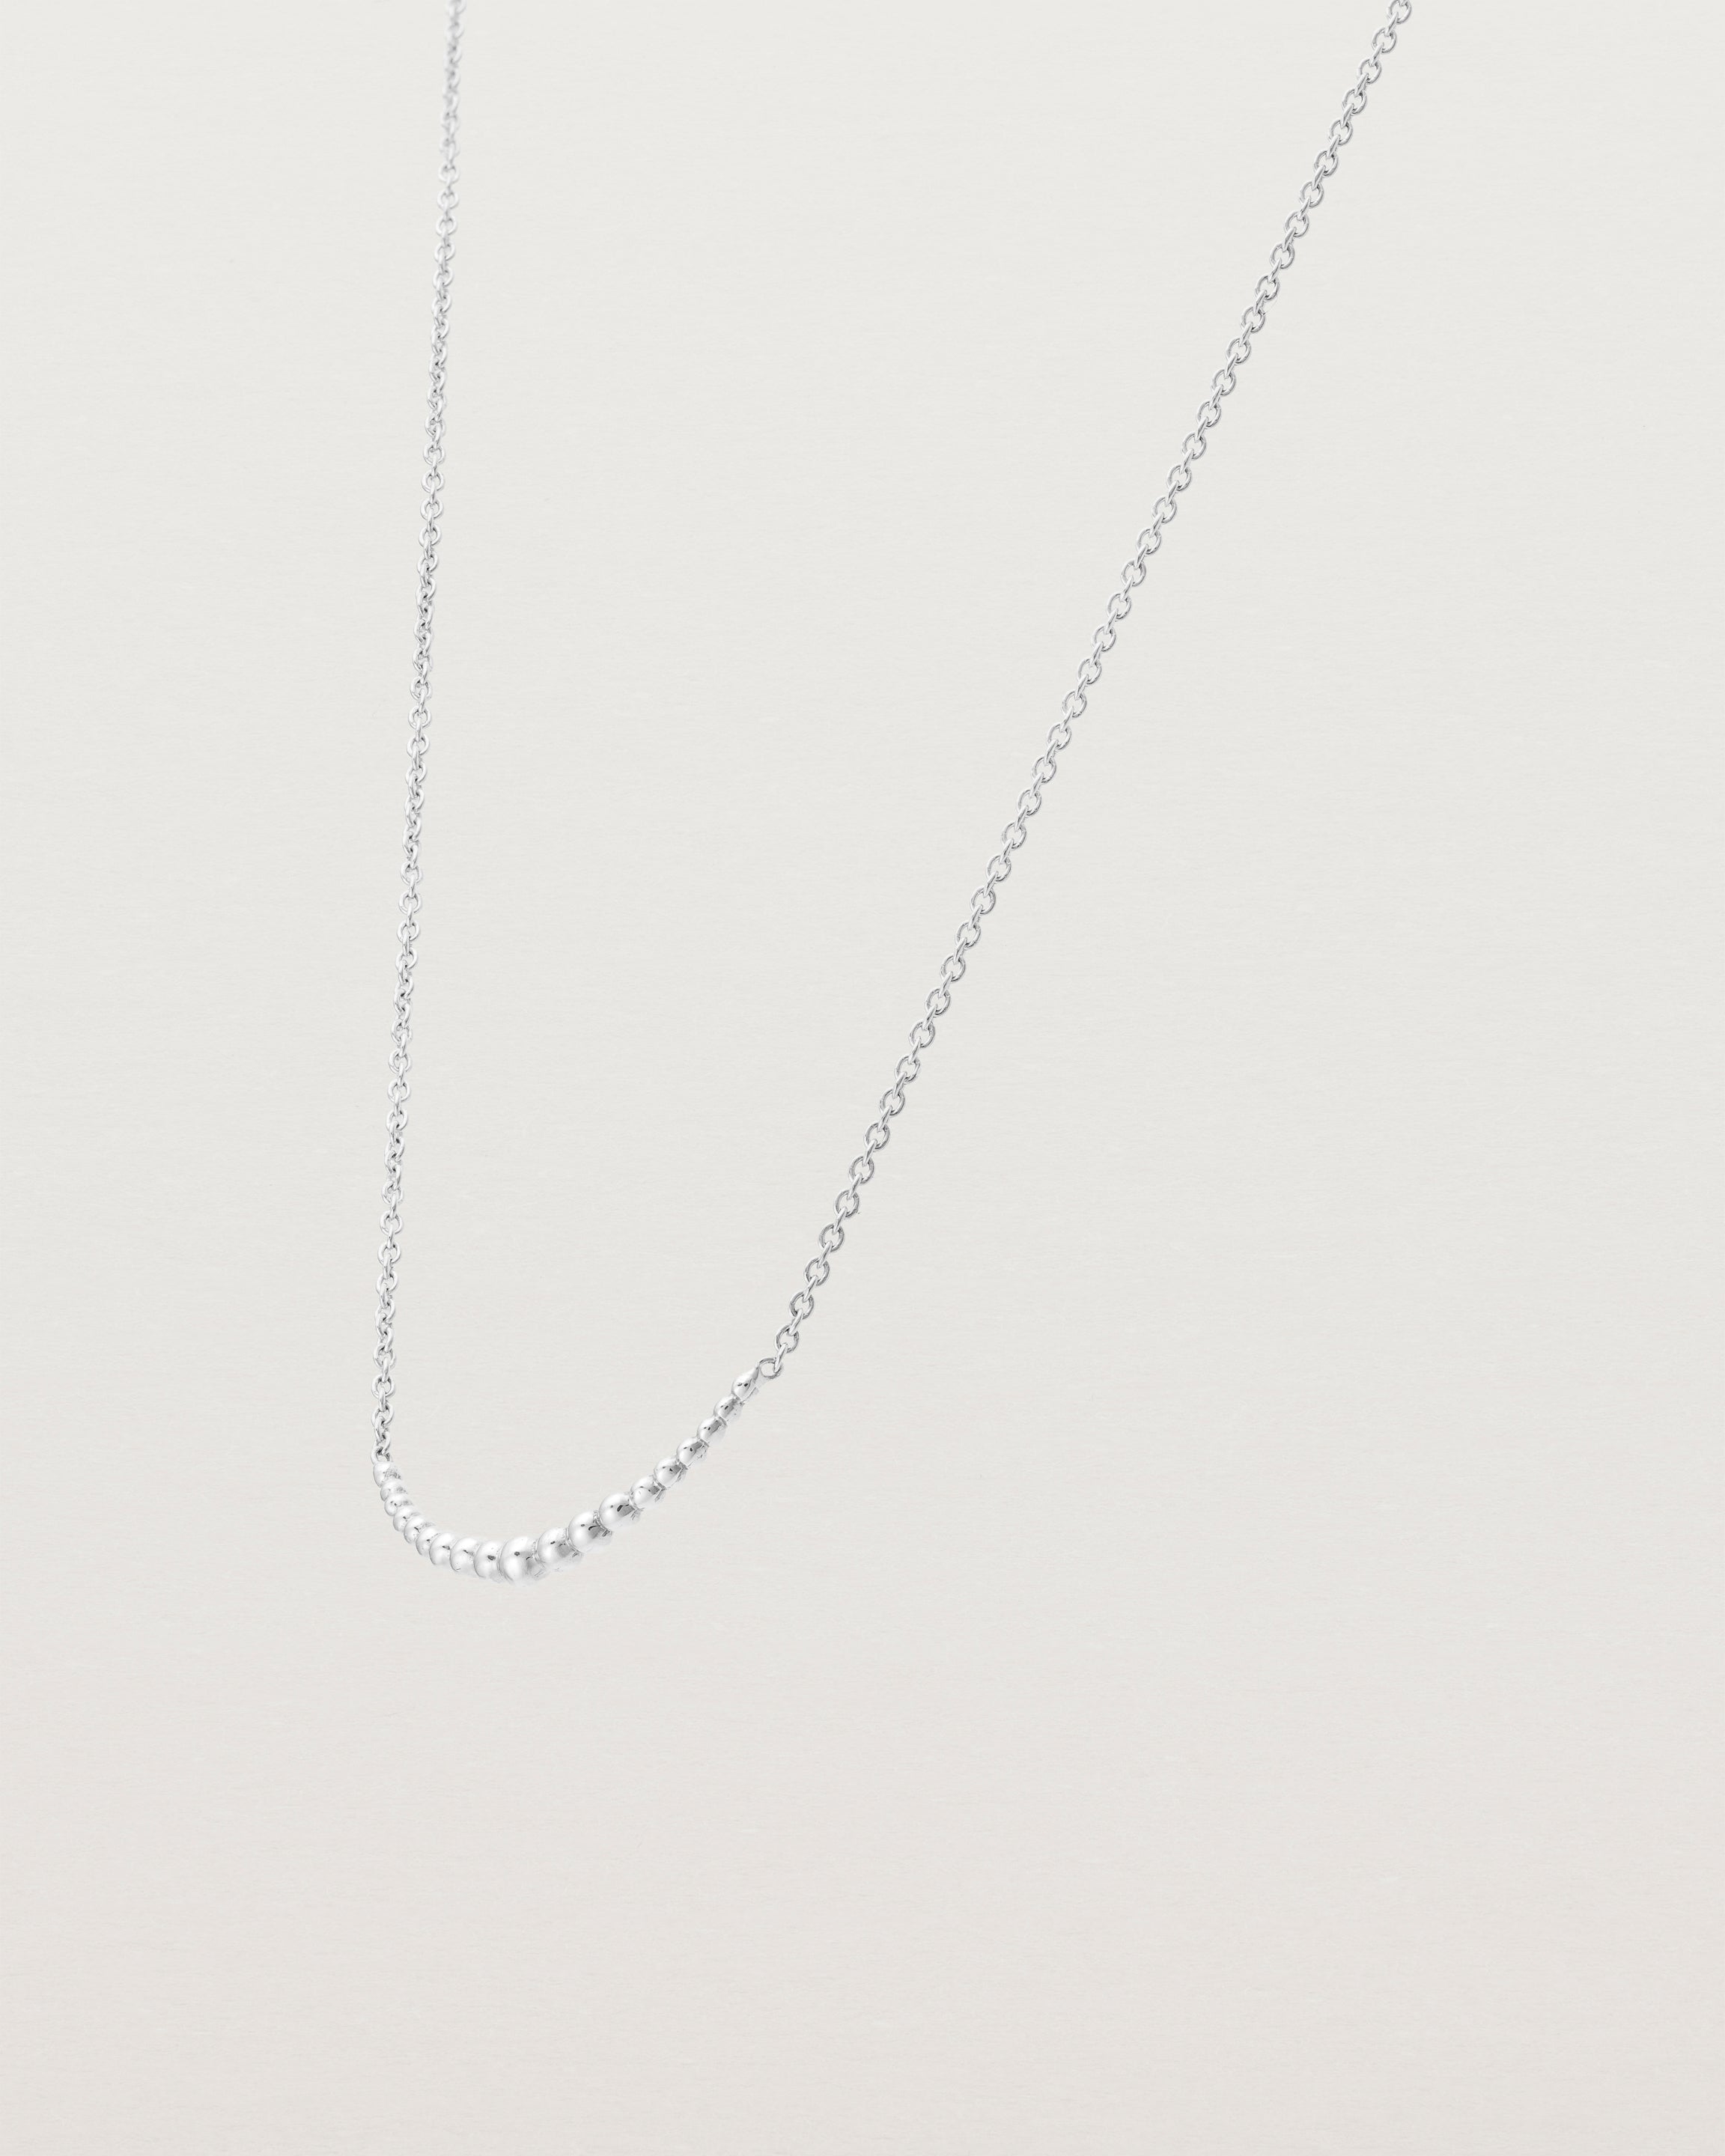 Angled view of the Crescent Necklace in Sterling Silver.